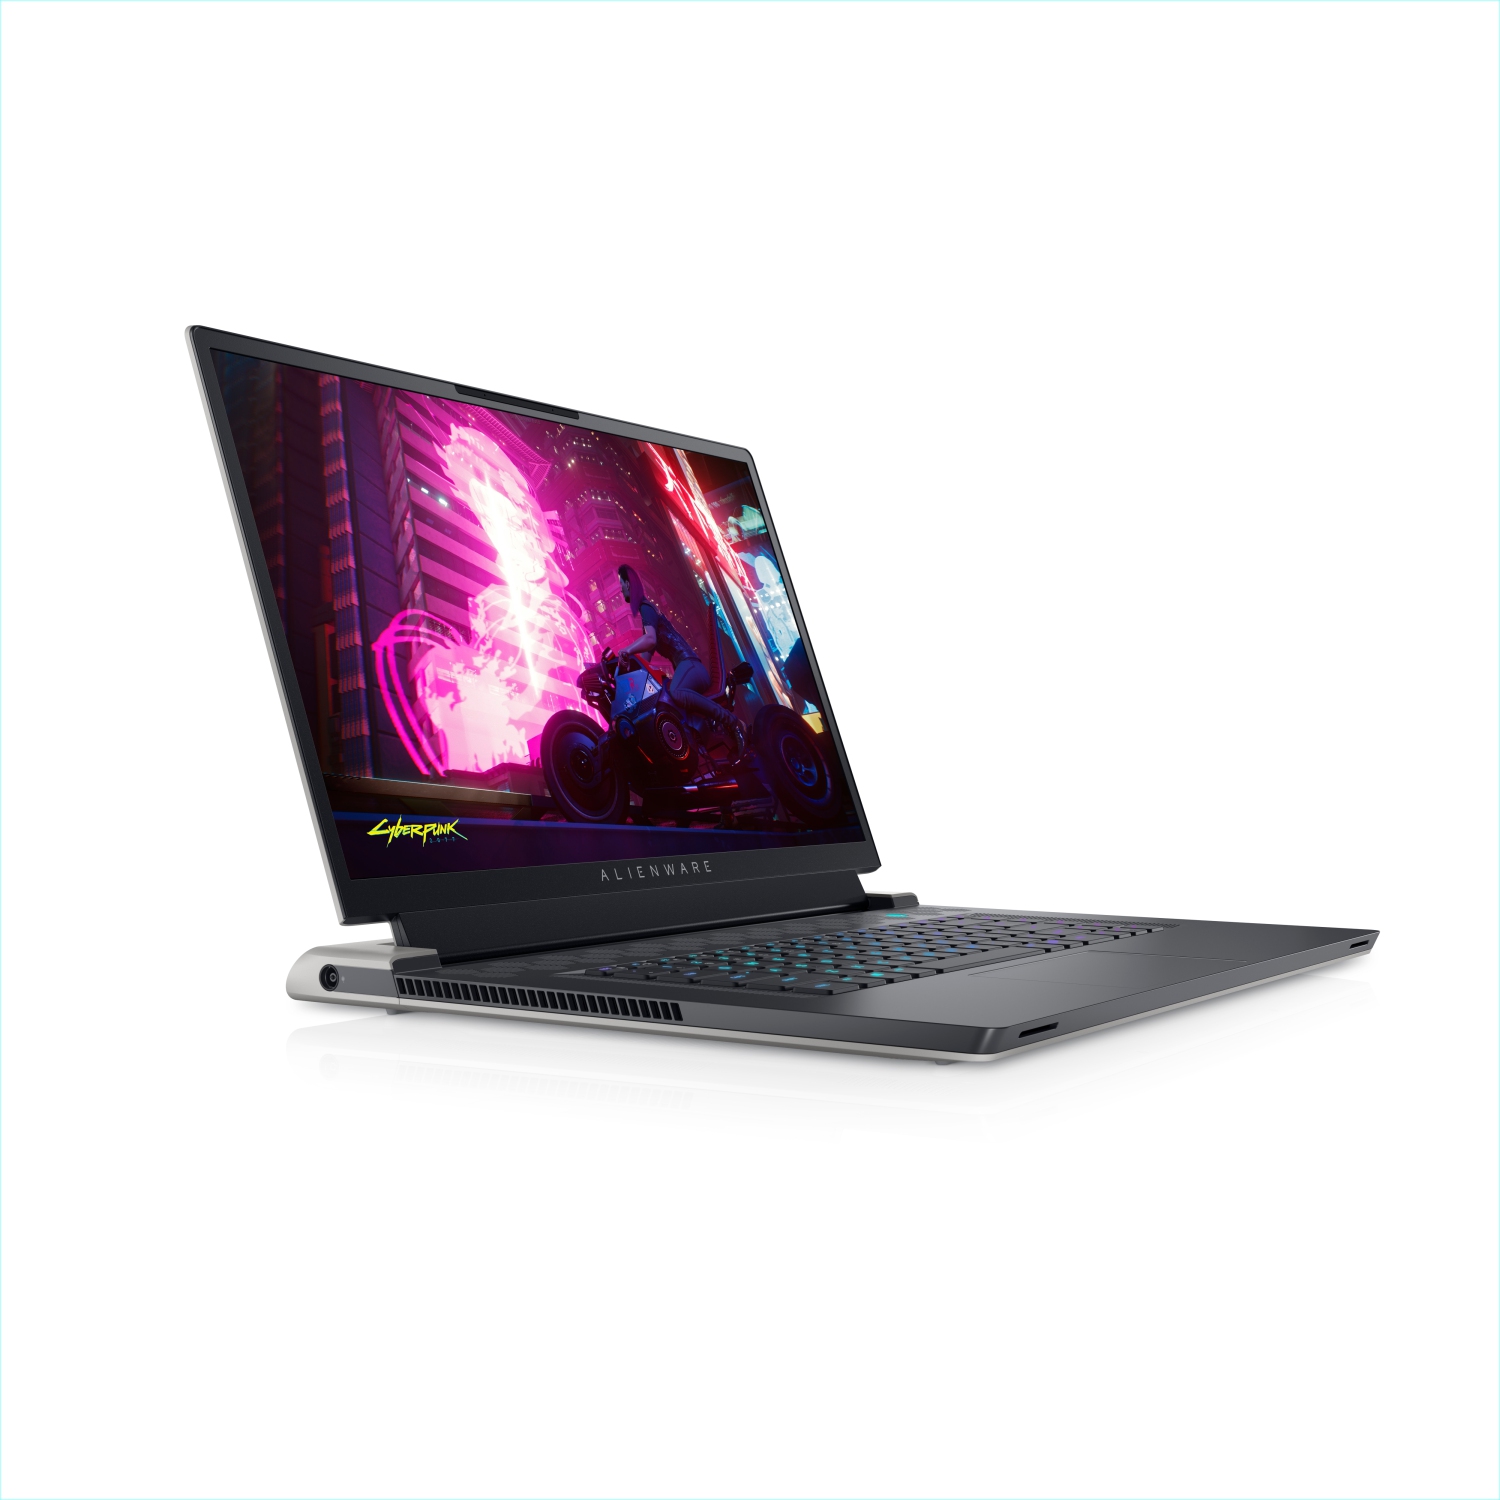 Refurbished (Excellent) - Dell Alienware X17 R1 Gaming Laptop (2021), 17.3" 4K, Core i9, 256GB SSD + 256GB SSD, 32GB RAM, RTX 3080, 5 GHz, 11th Gen CPU Certified